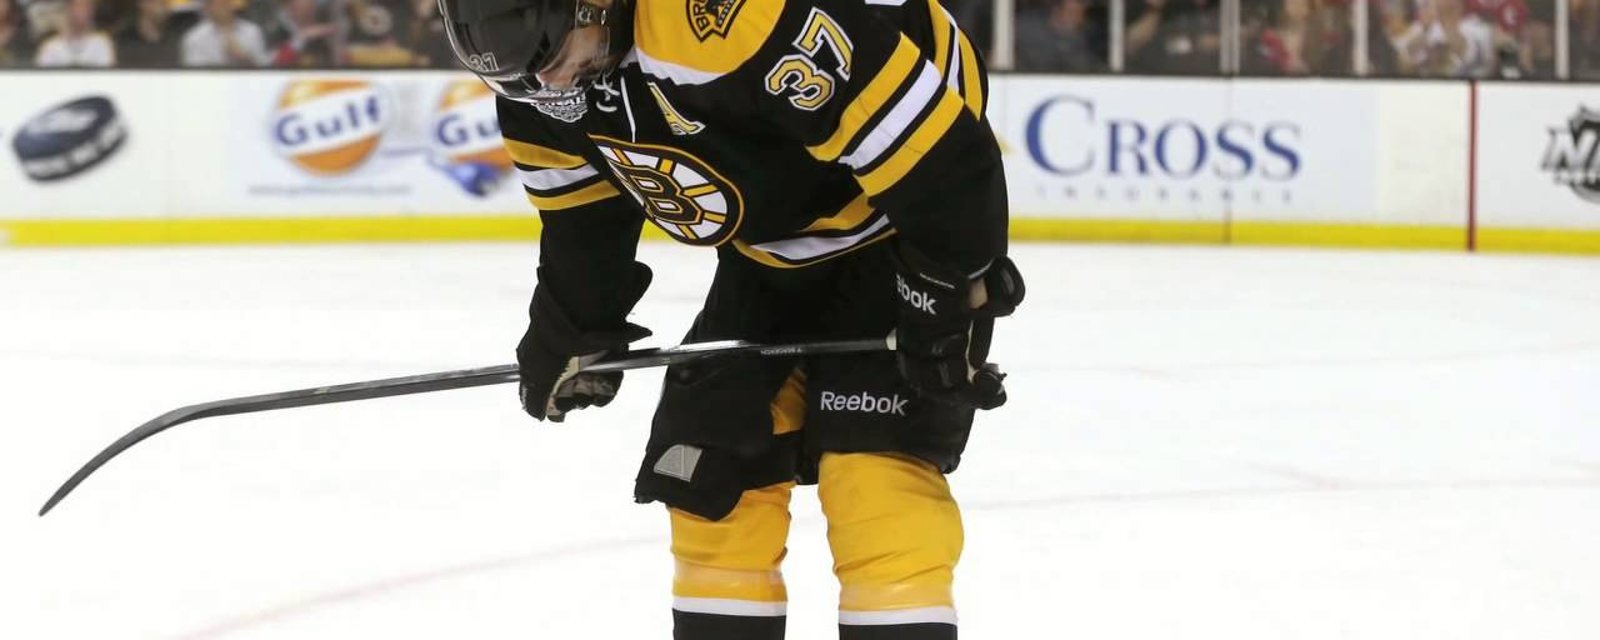 Patrice Bergeron gets hate following his retirement